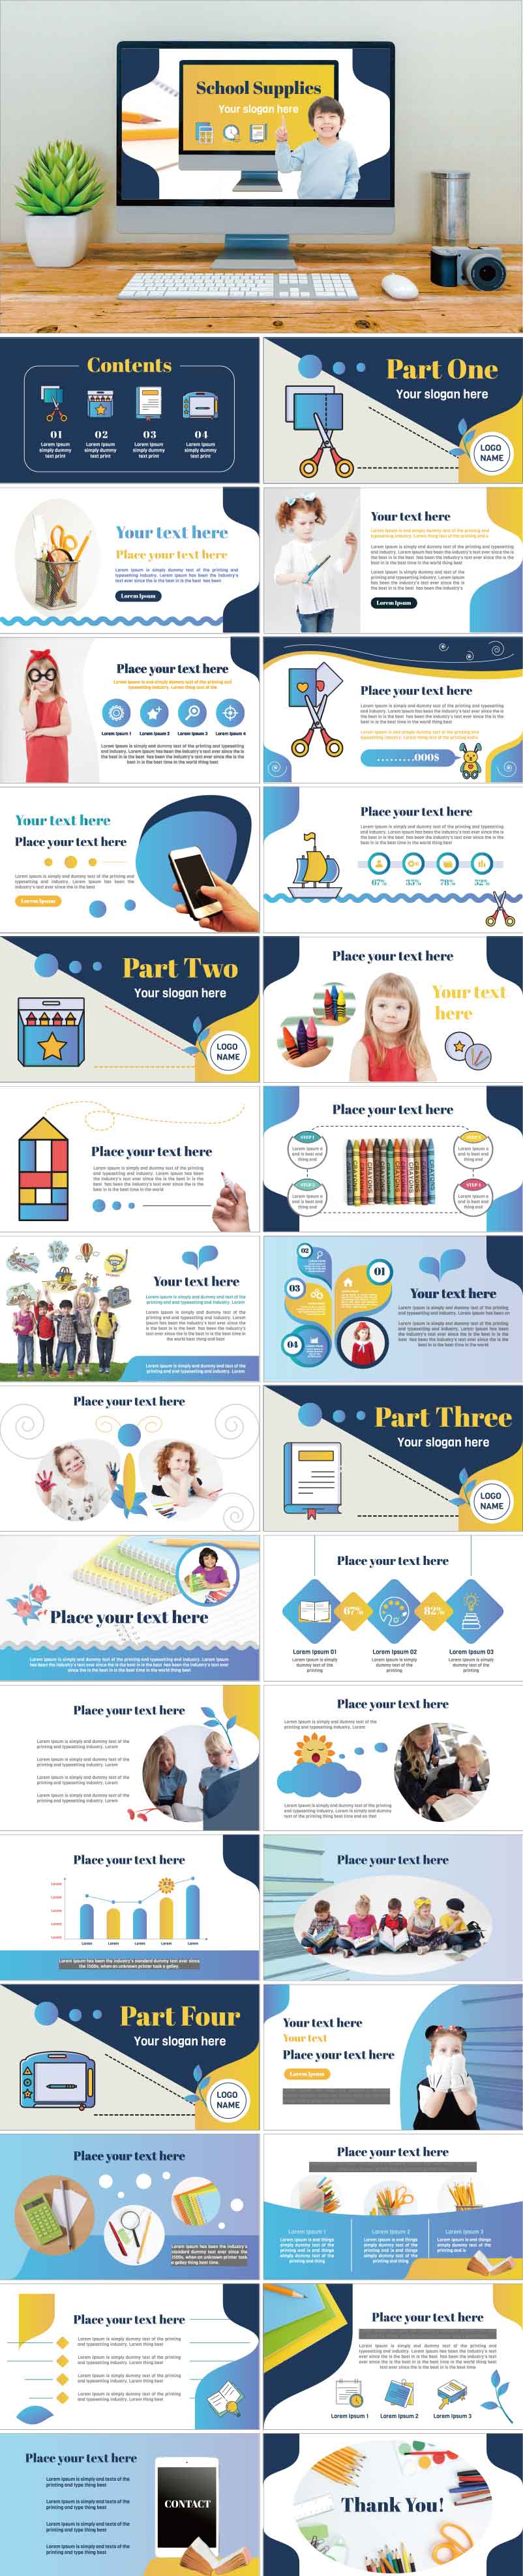 PowerPoint template vol.38